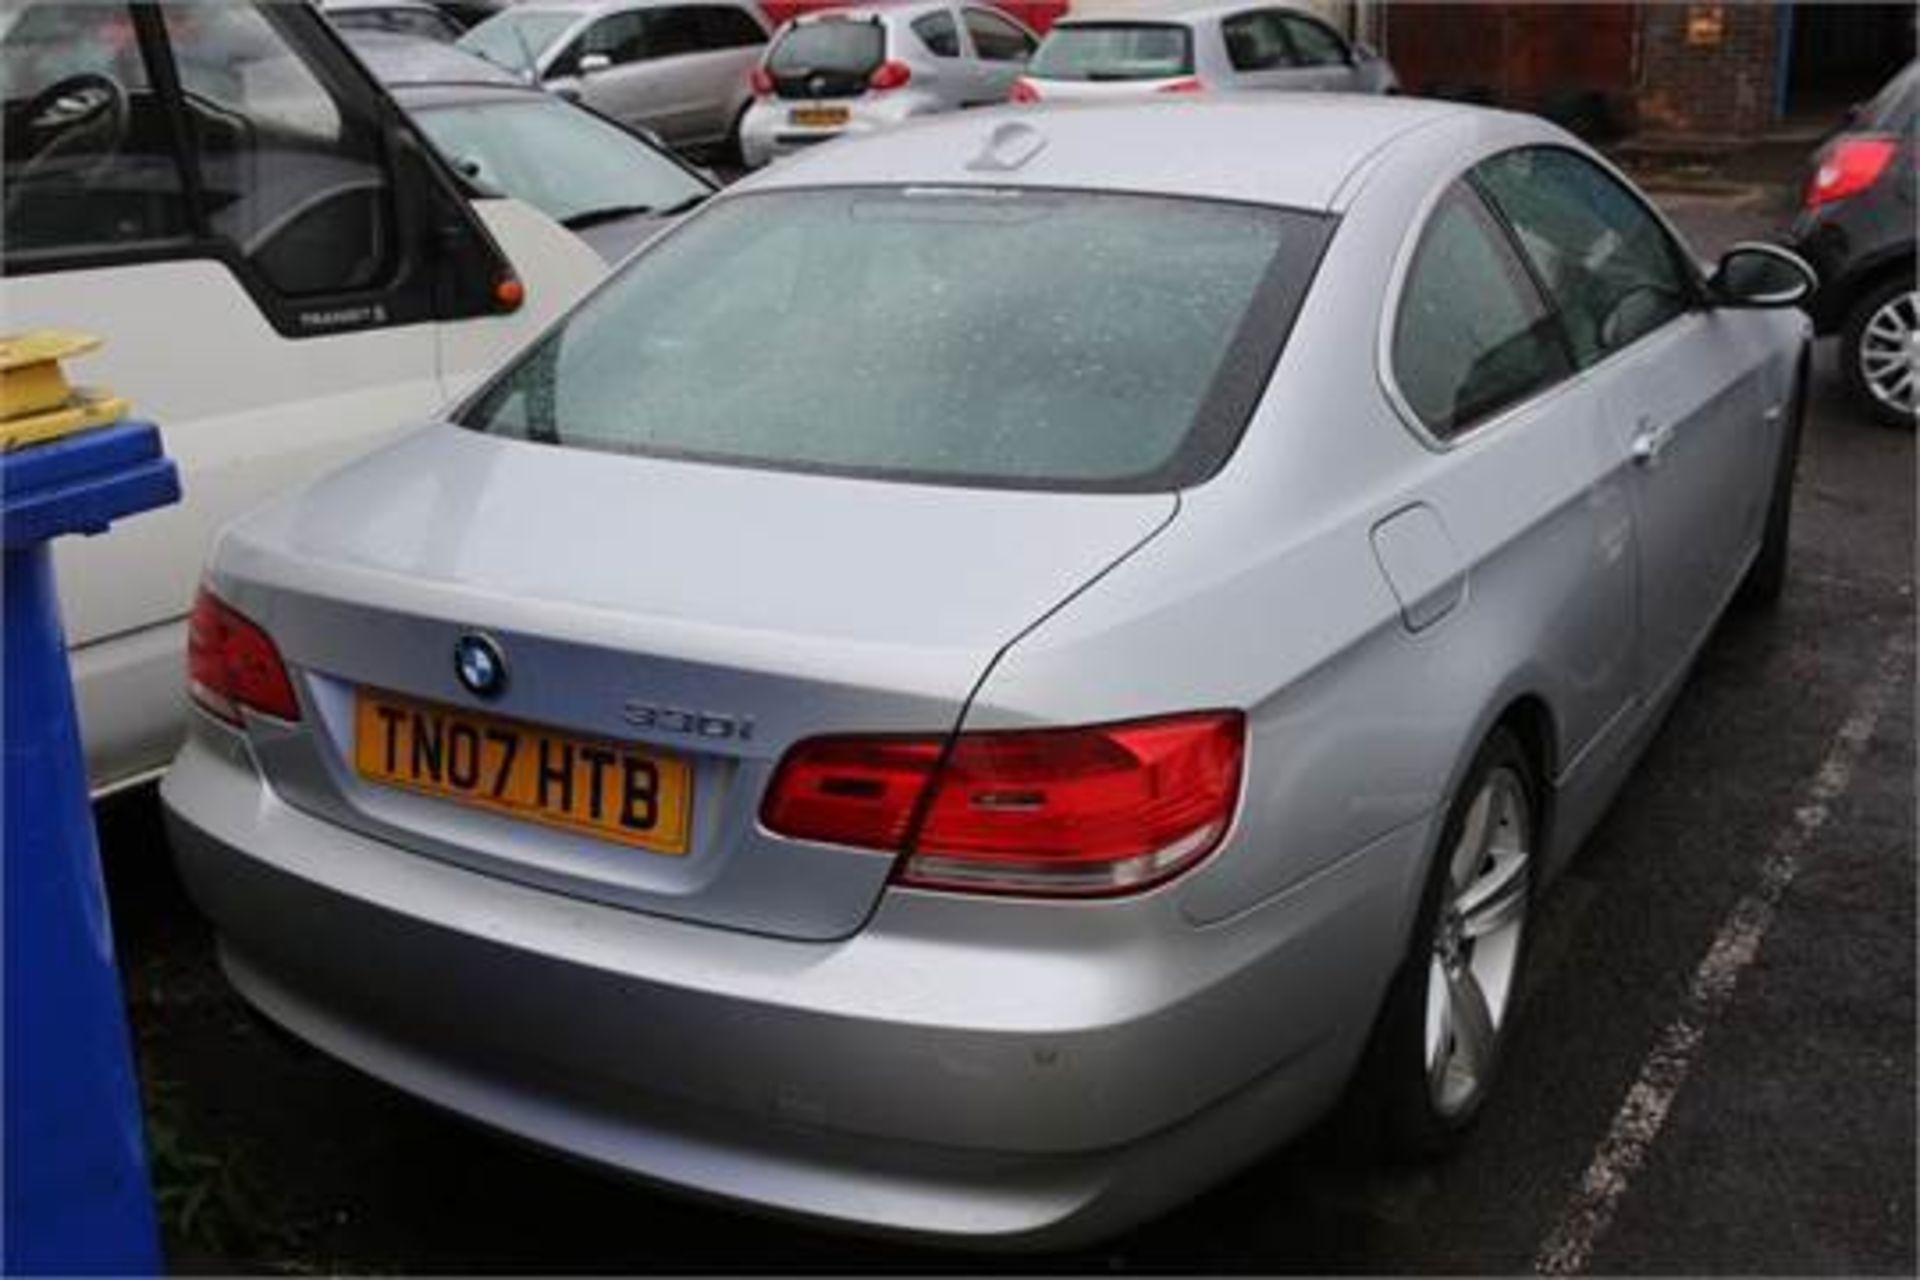 BMW, 330 SE COUPE, TN07 HTB, 3-0 LTR, PETROL, AUTOMATIC, 2 DOOR COUPE, 25.05.2007, CURRENT - Image 2 of 13